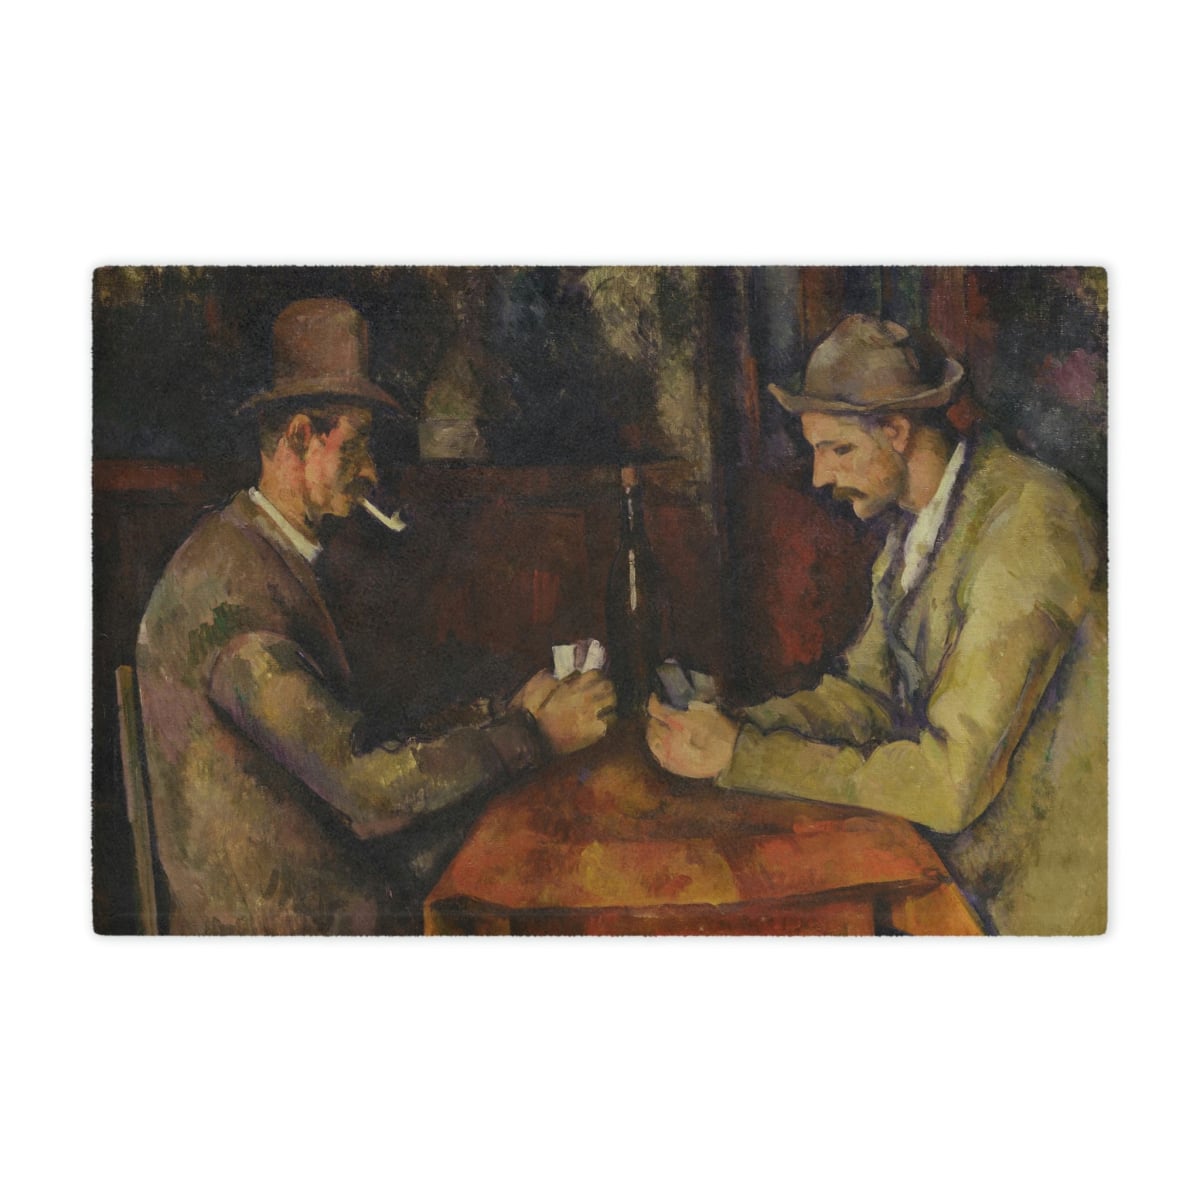 Art lovers' favorite: Cézanne's 'The Card Players' on a blanket